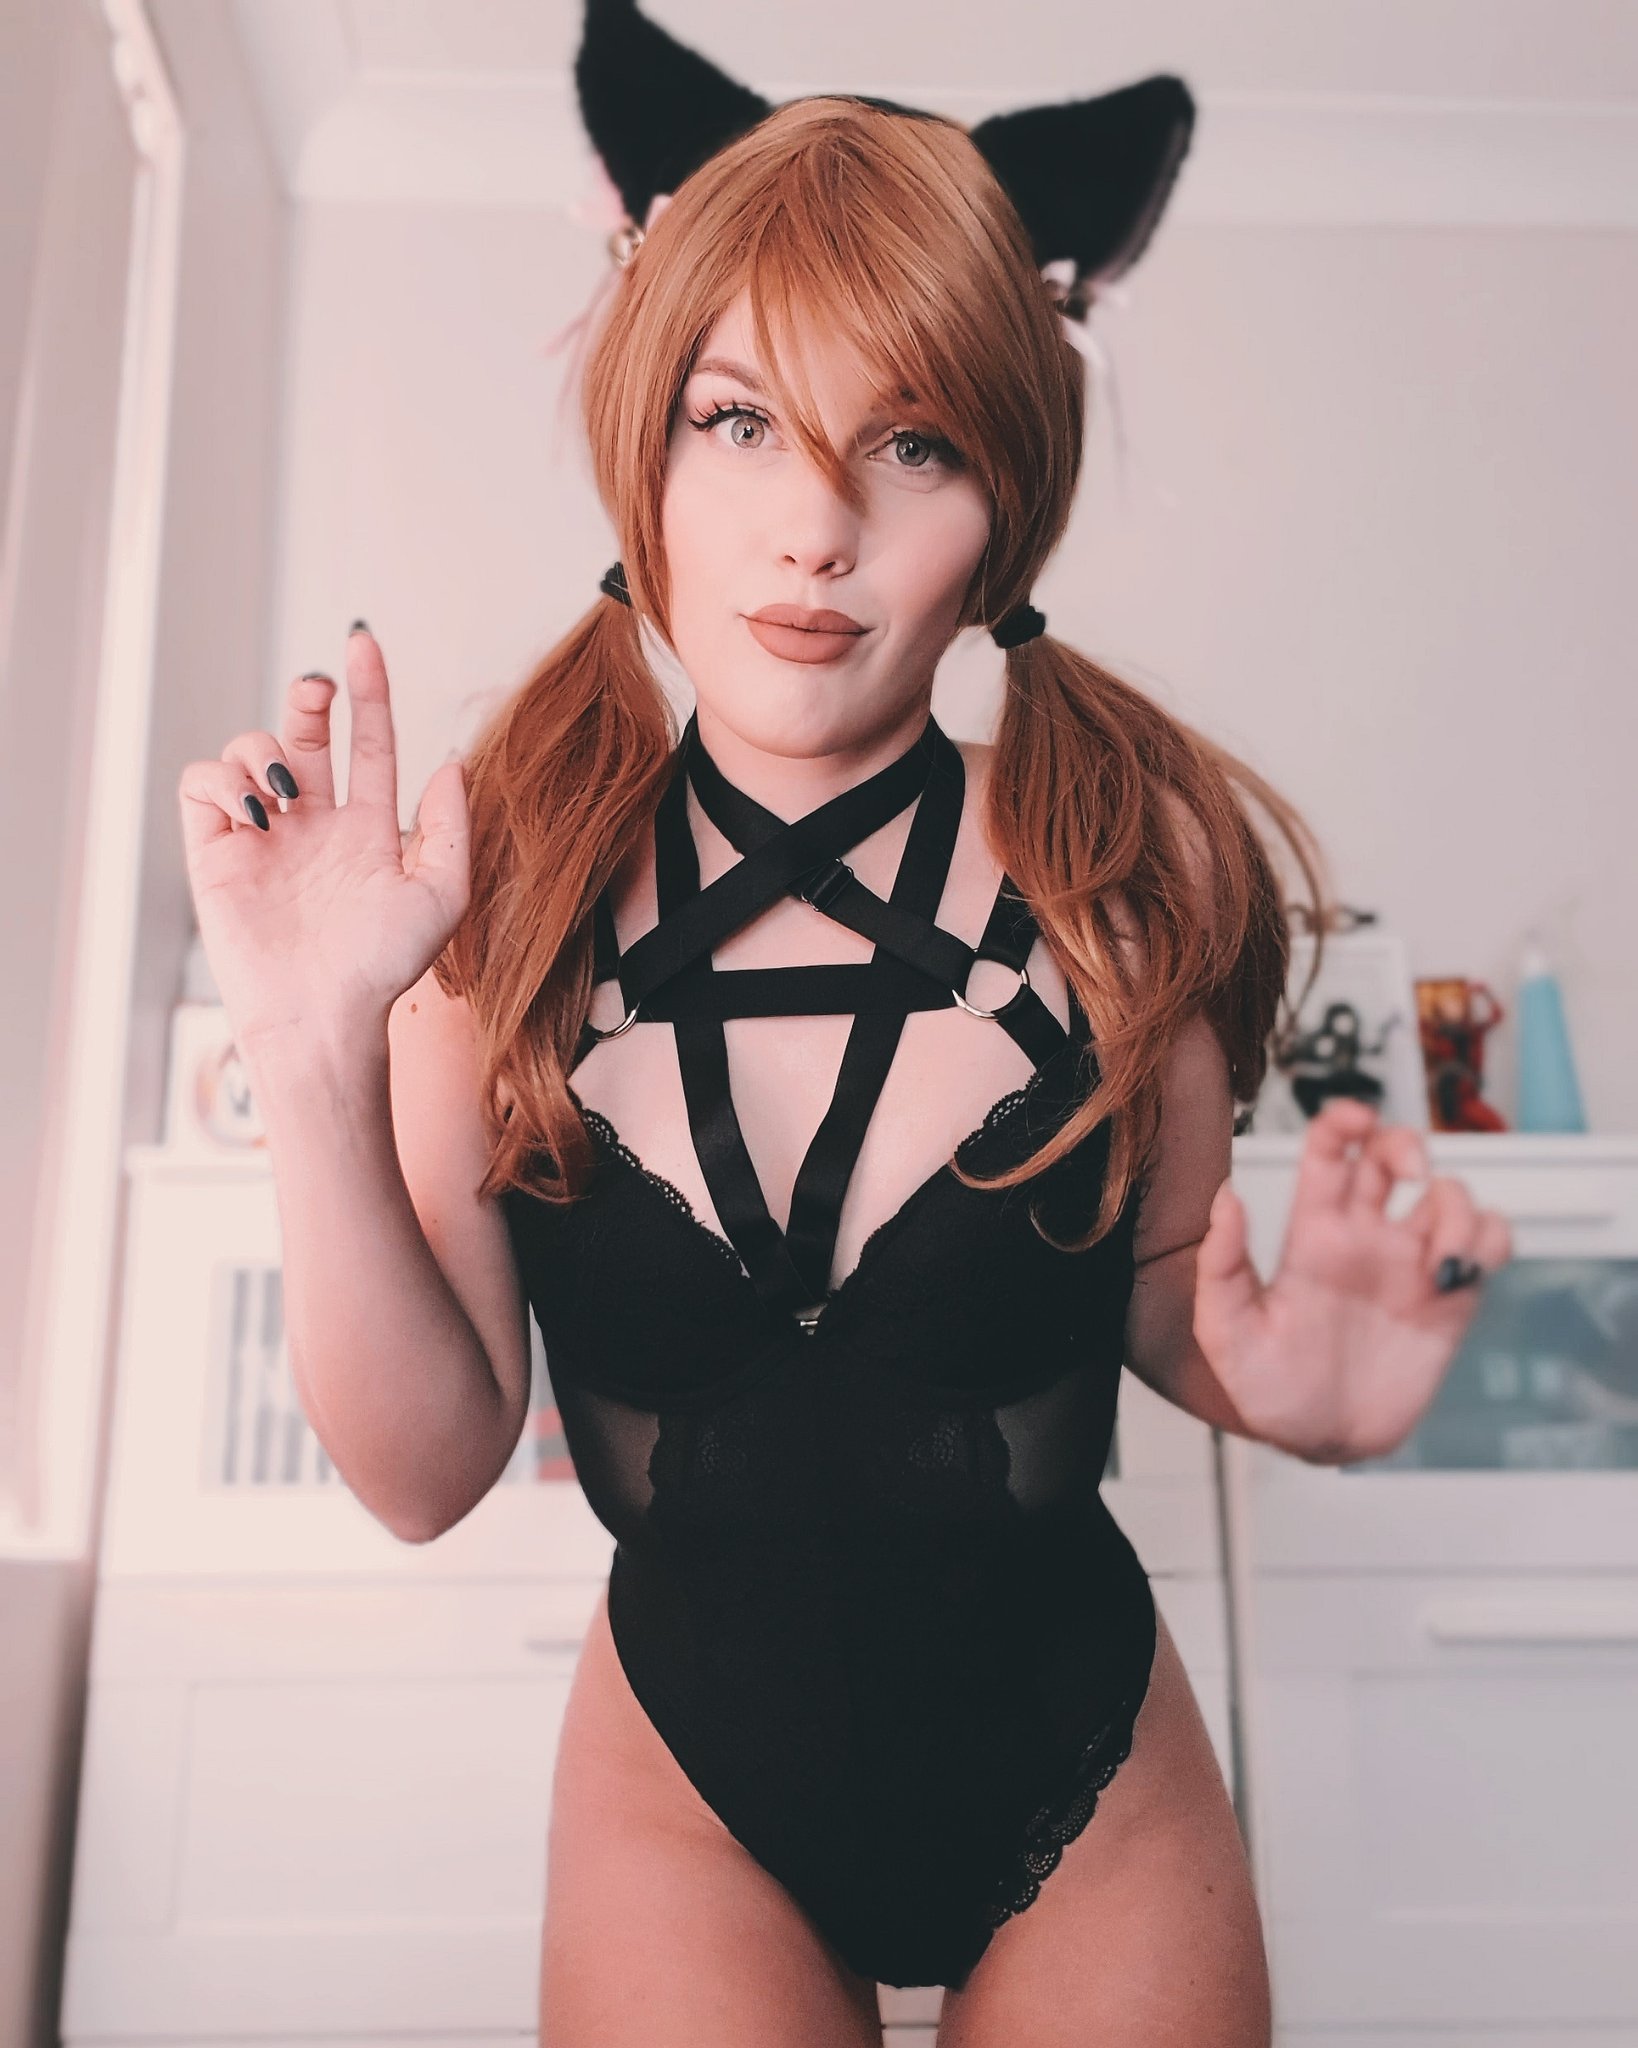 Patreon lucky bonez About